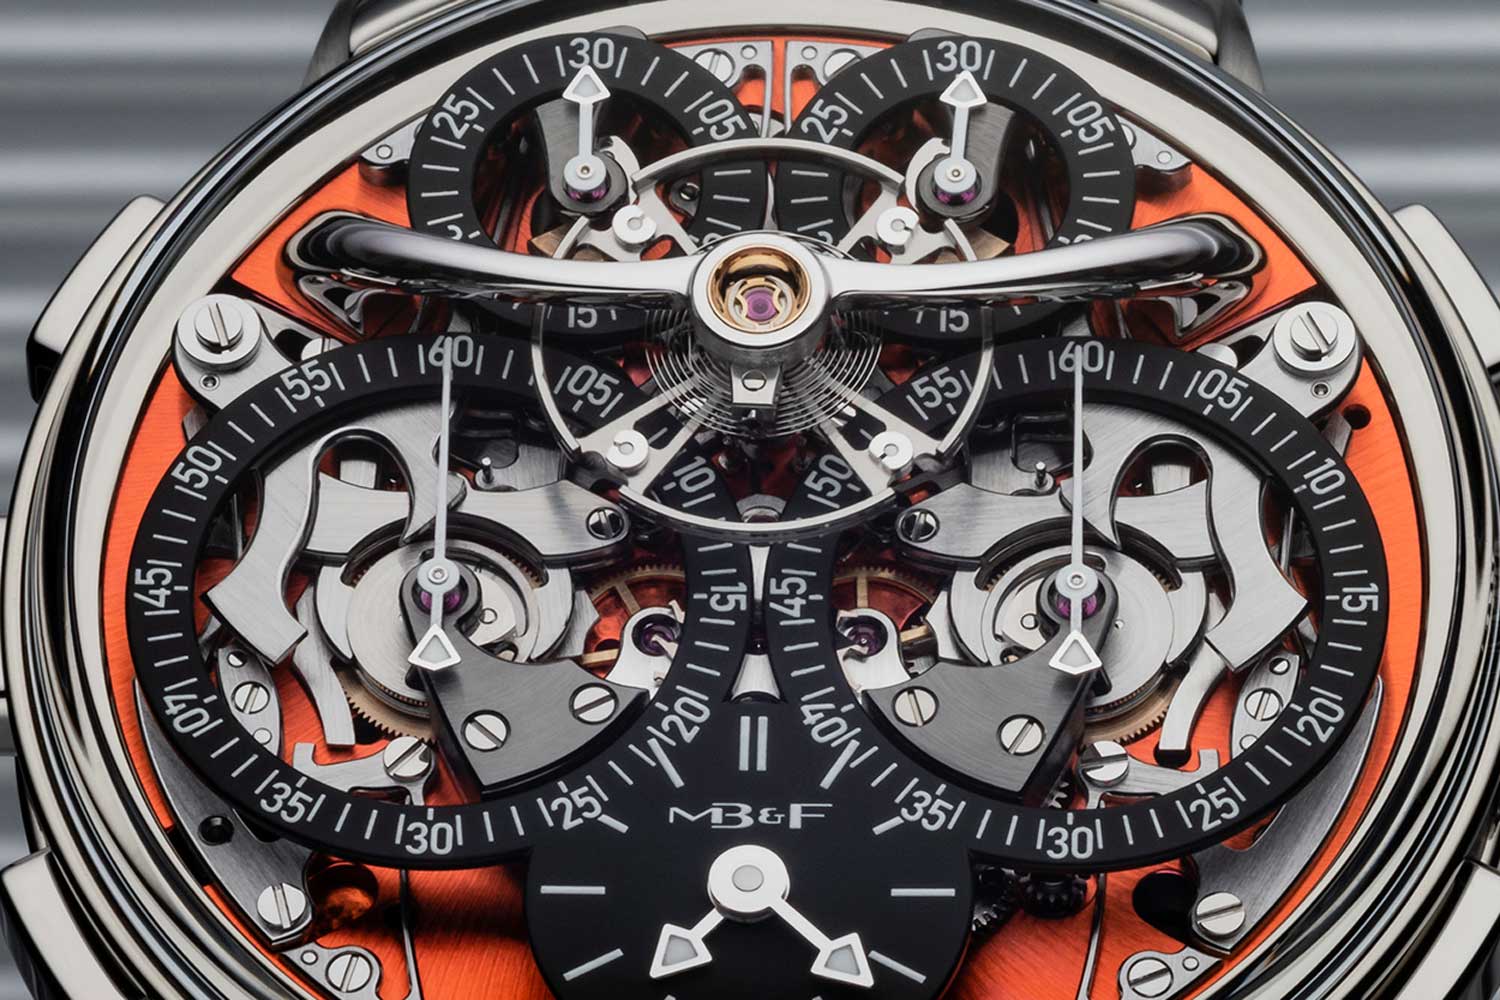 The dial features with two symmetrical, openworked chronograph displays